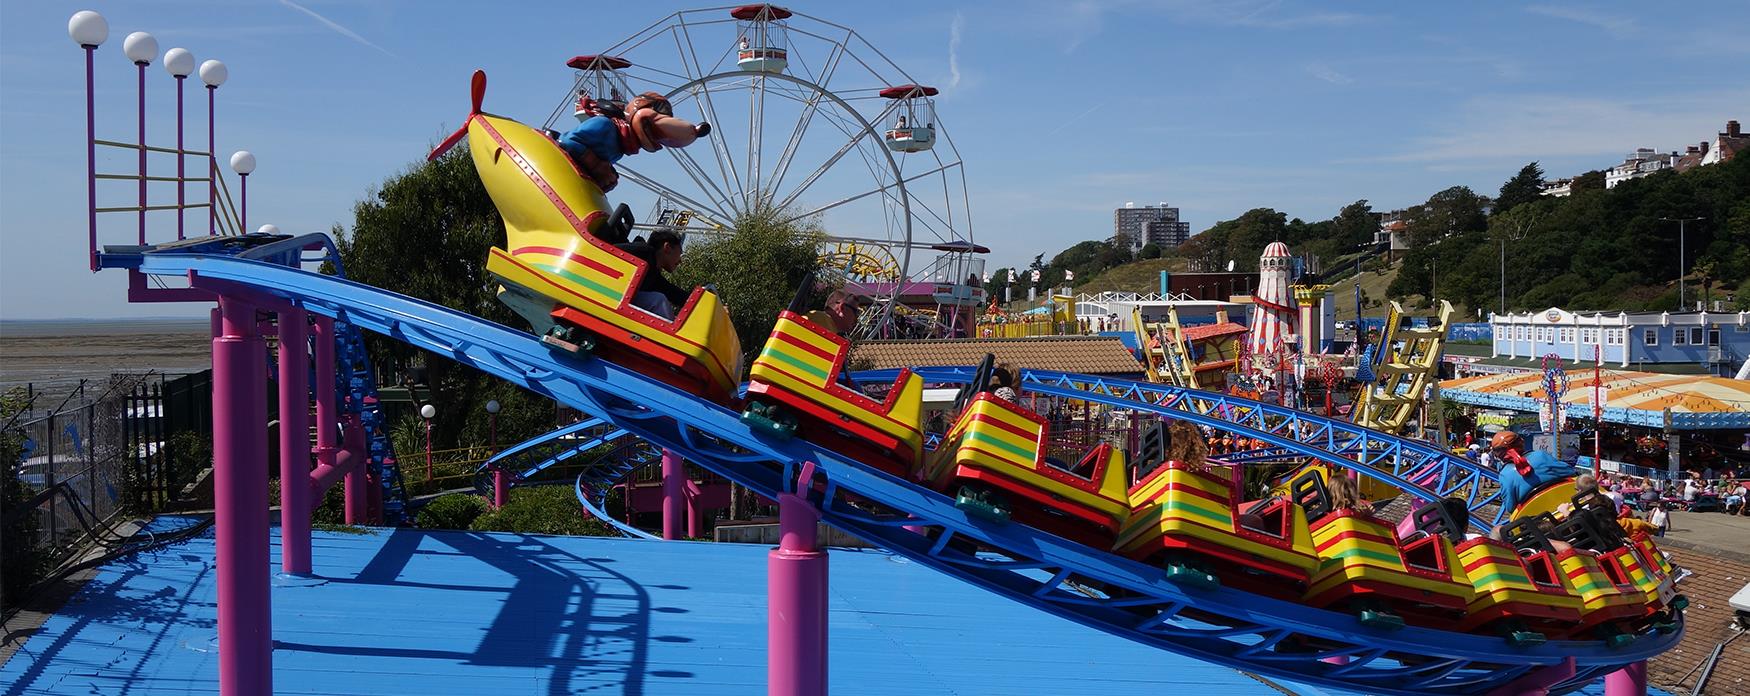 19 Best Theme Parks and Funfairs In Warrington Near Me